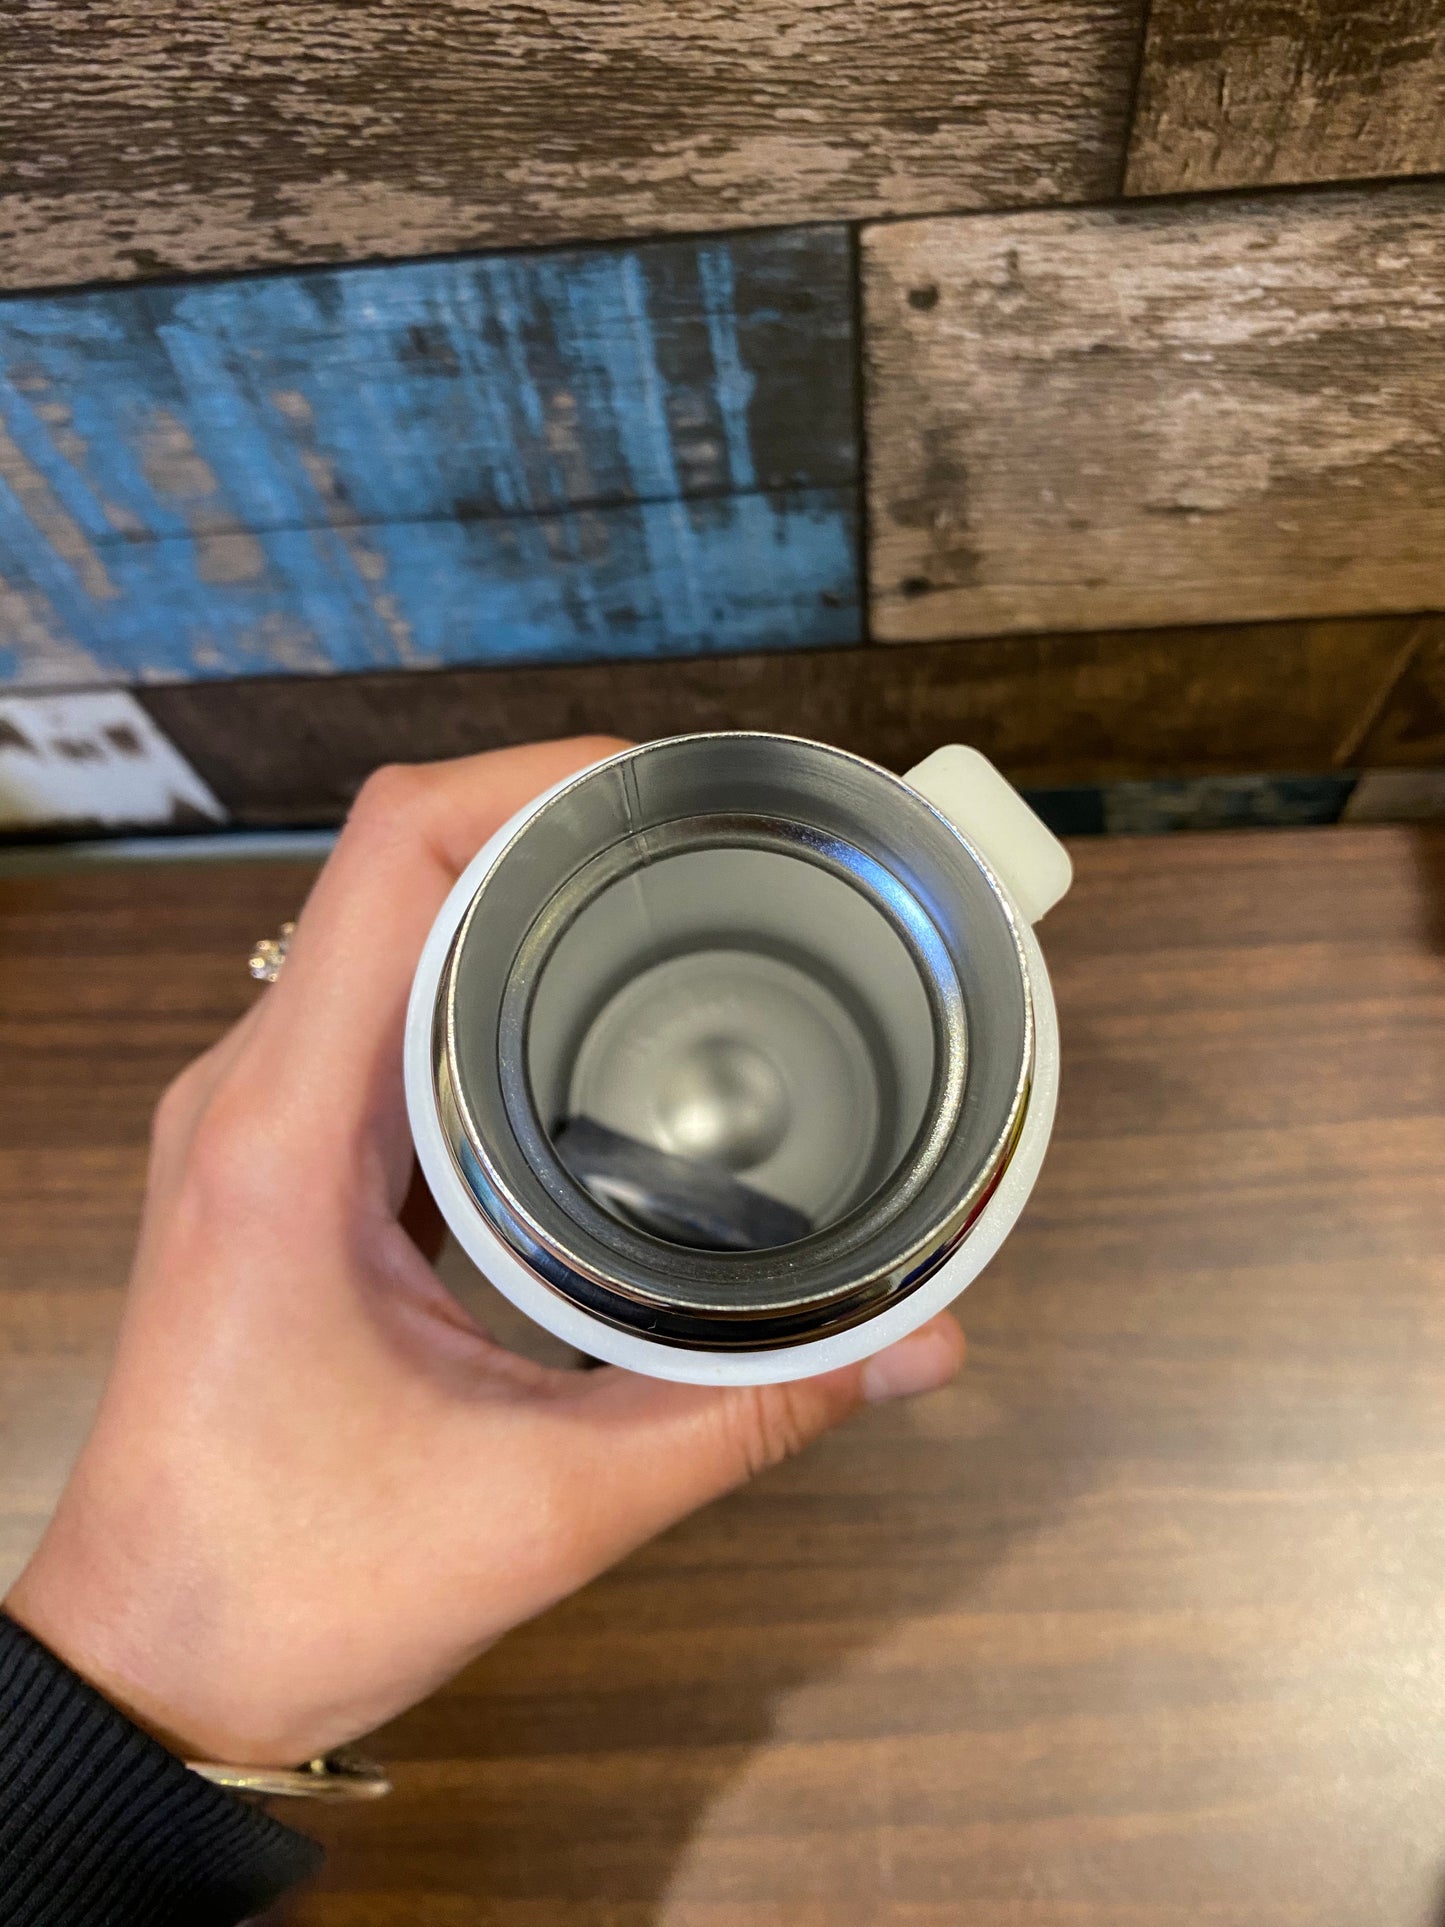 Insulated Sipper